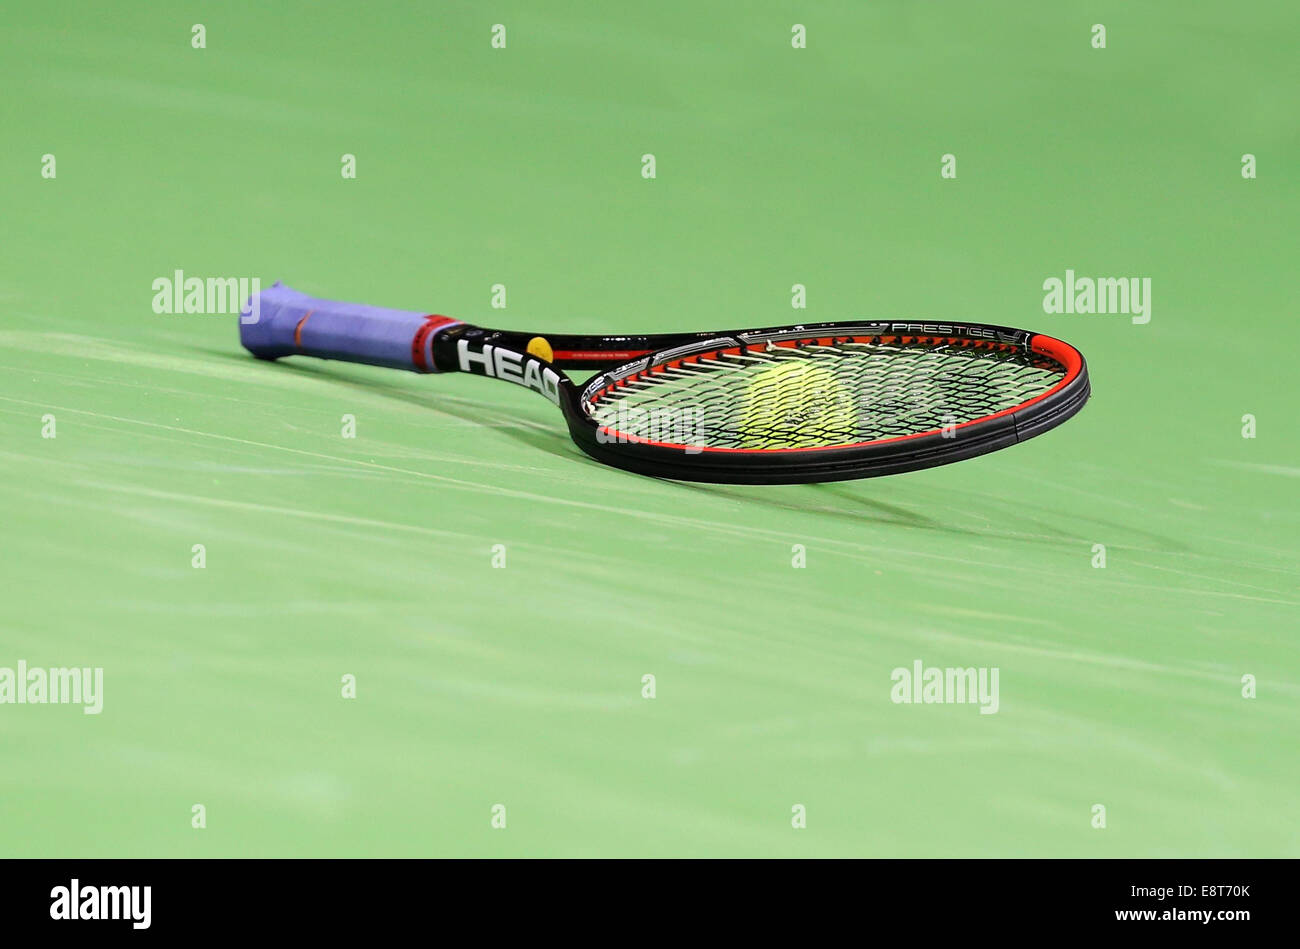 Tennis racket on the ground, Germany Stock Photo